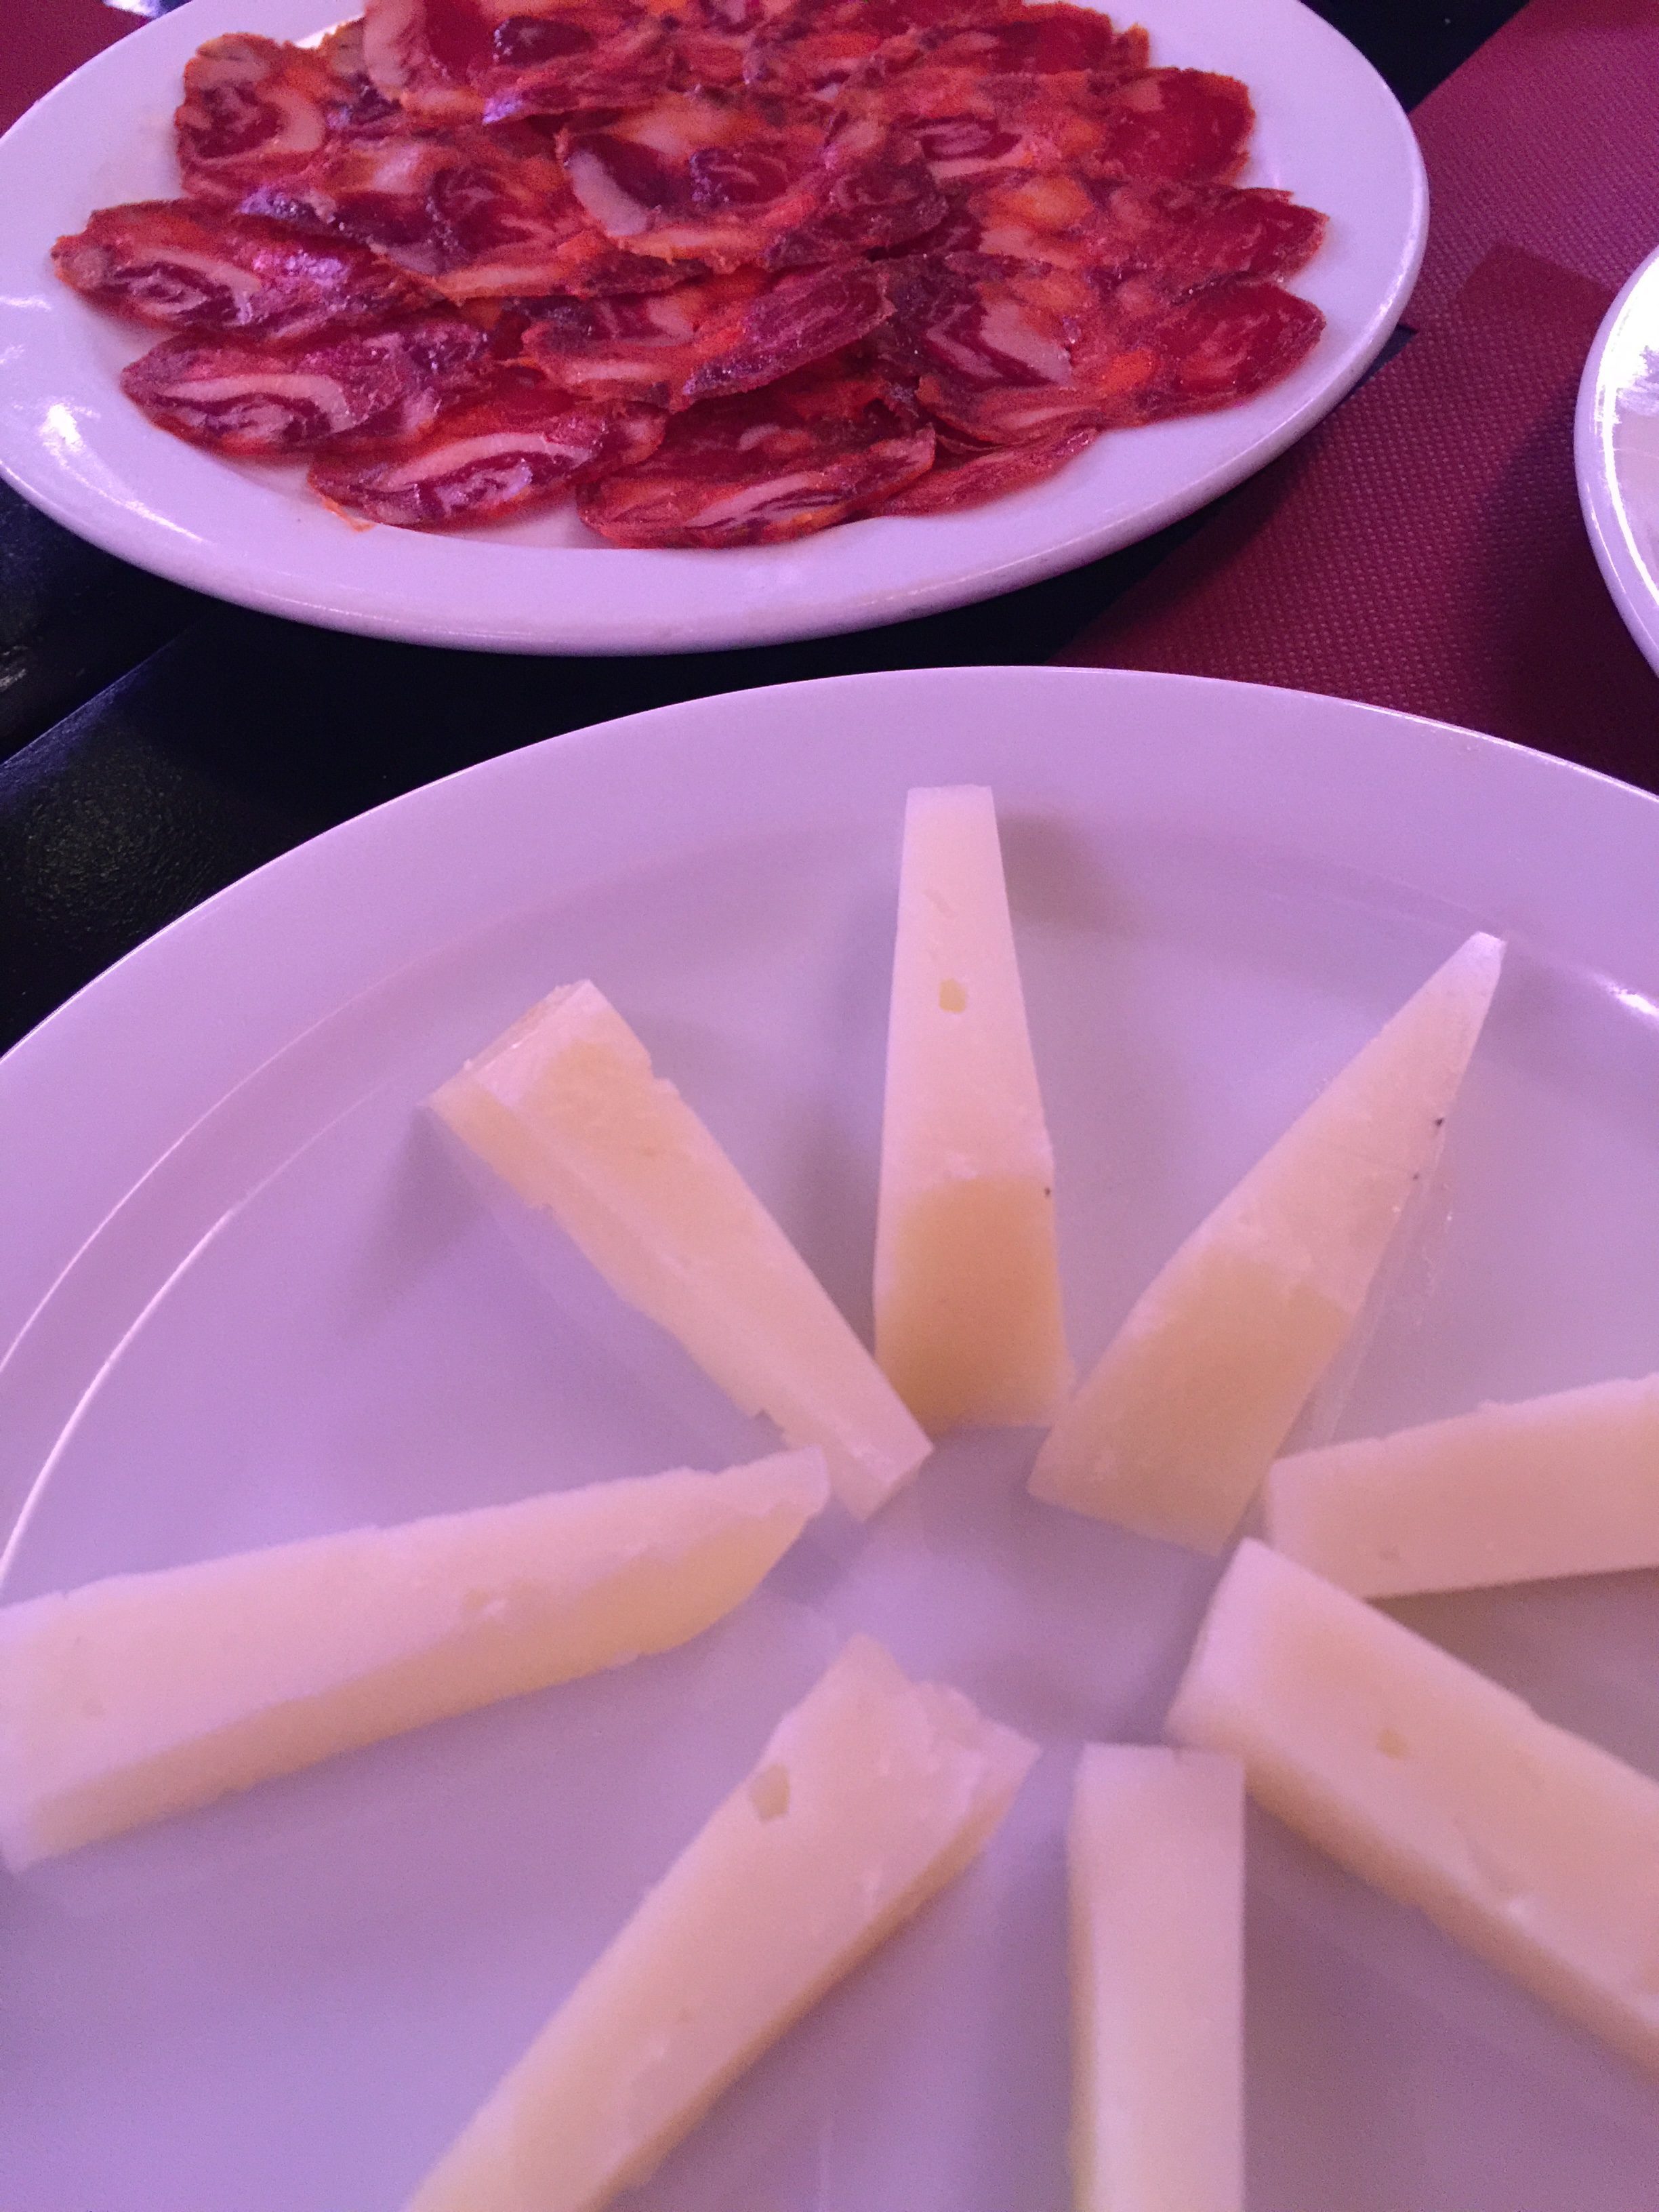 Spanish sheep cheese is love at first bite!